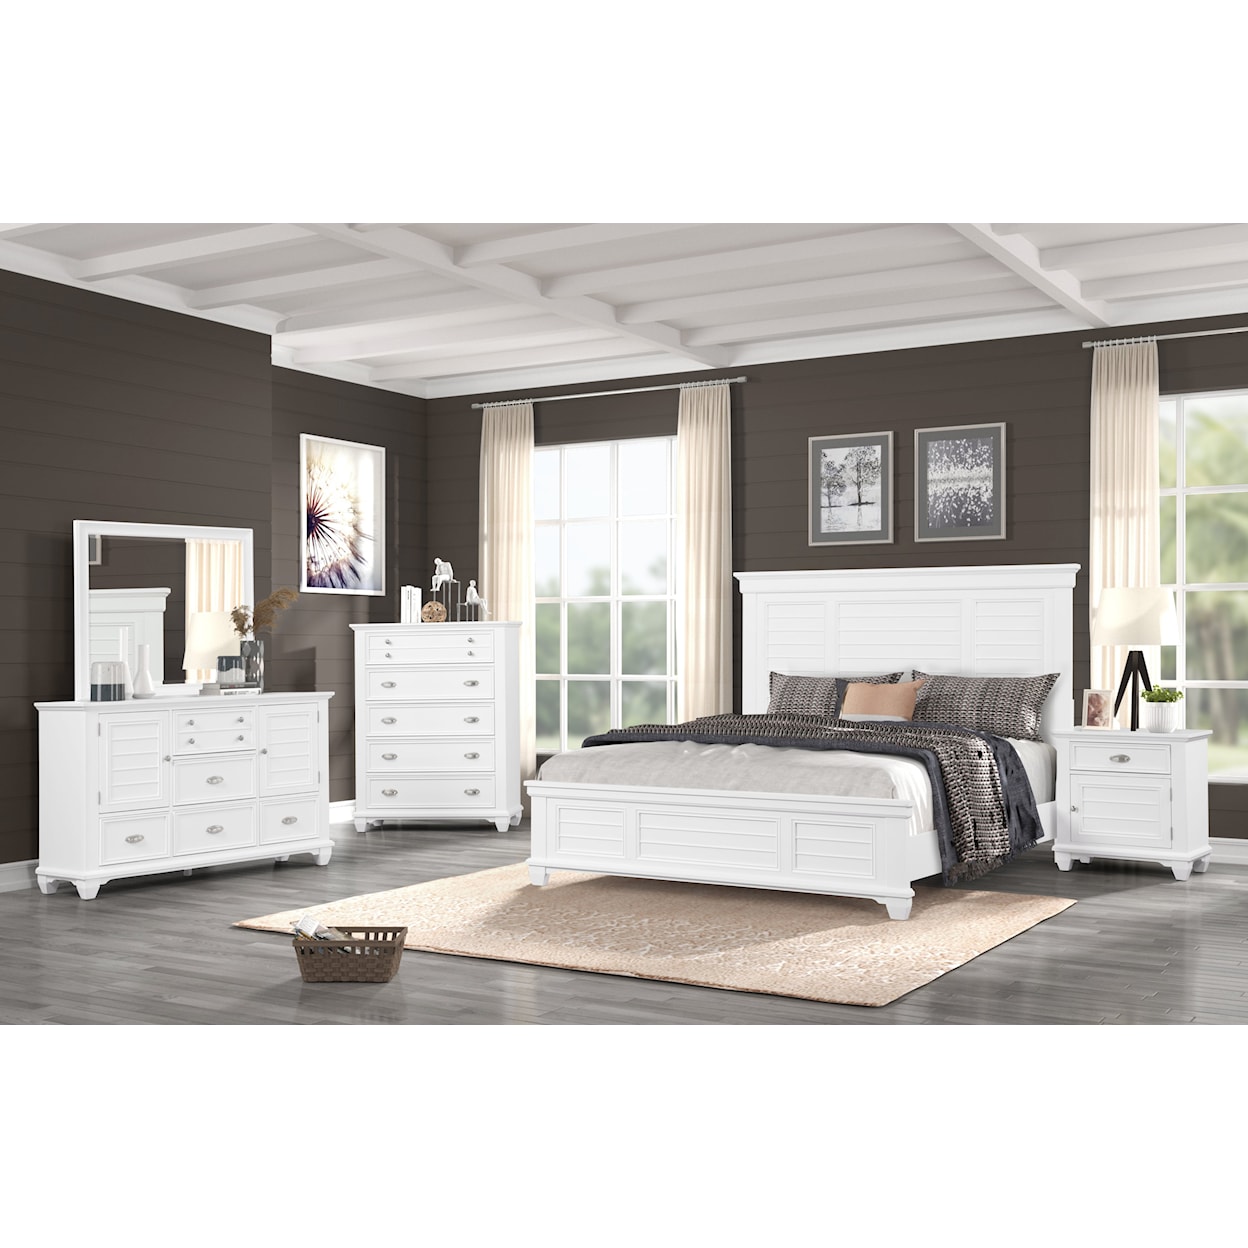 New Classic Jamestown King Bed